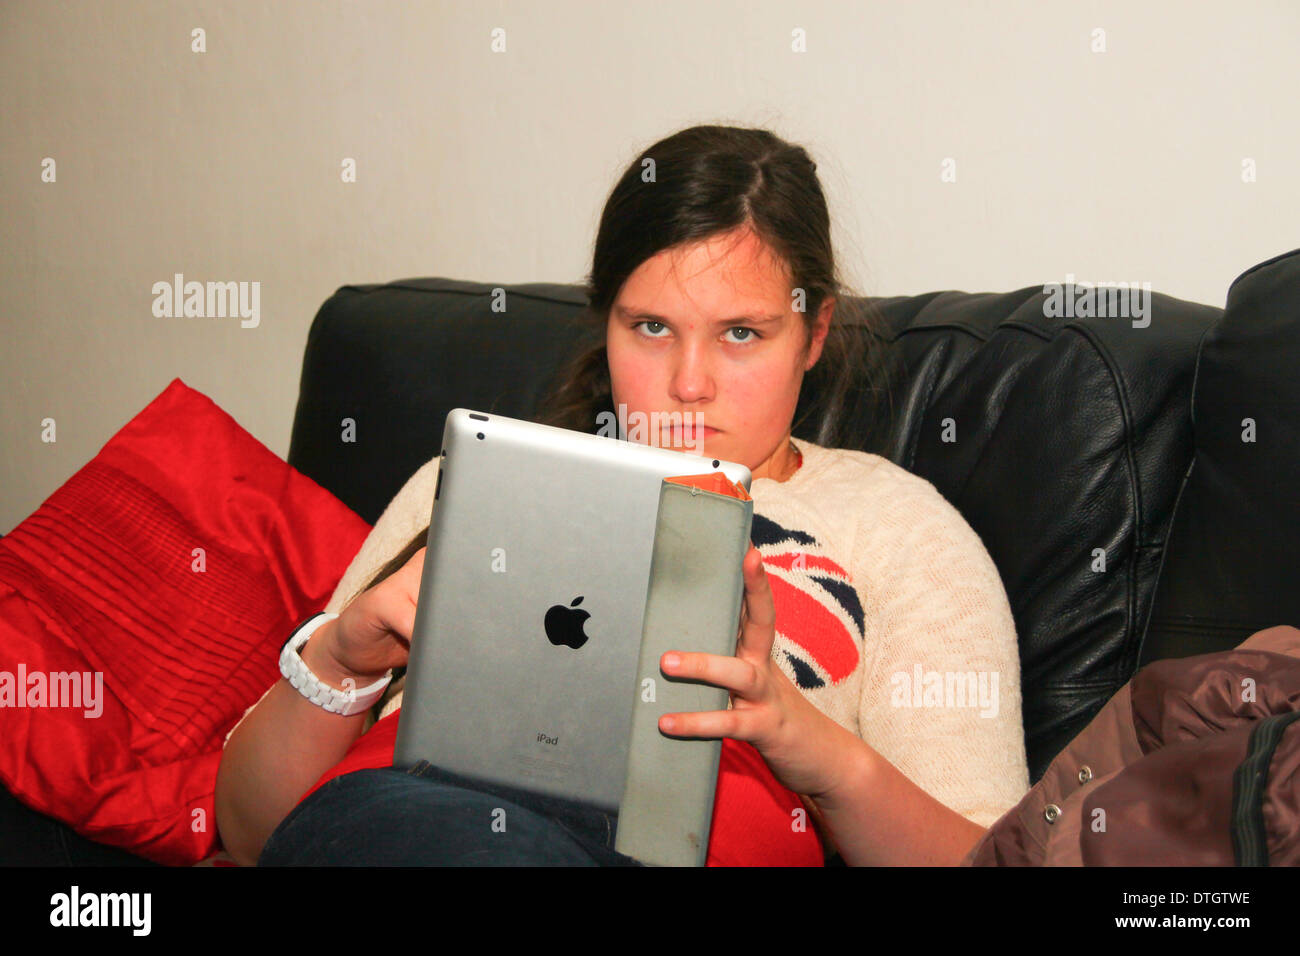 Sullen young girl with iPad tablet Stock Photo